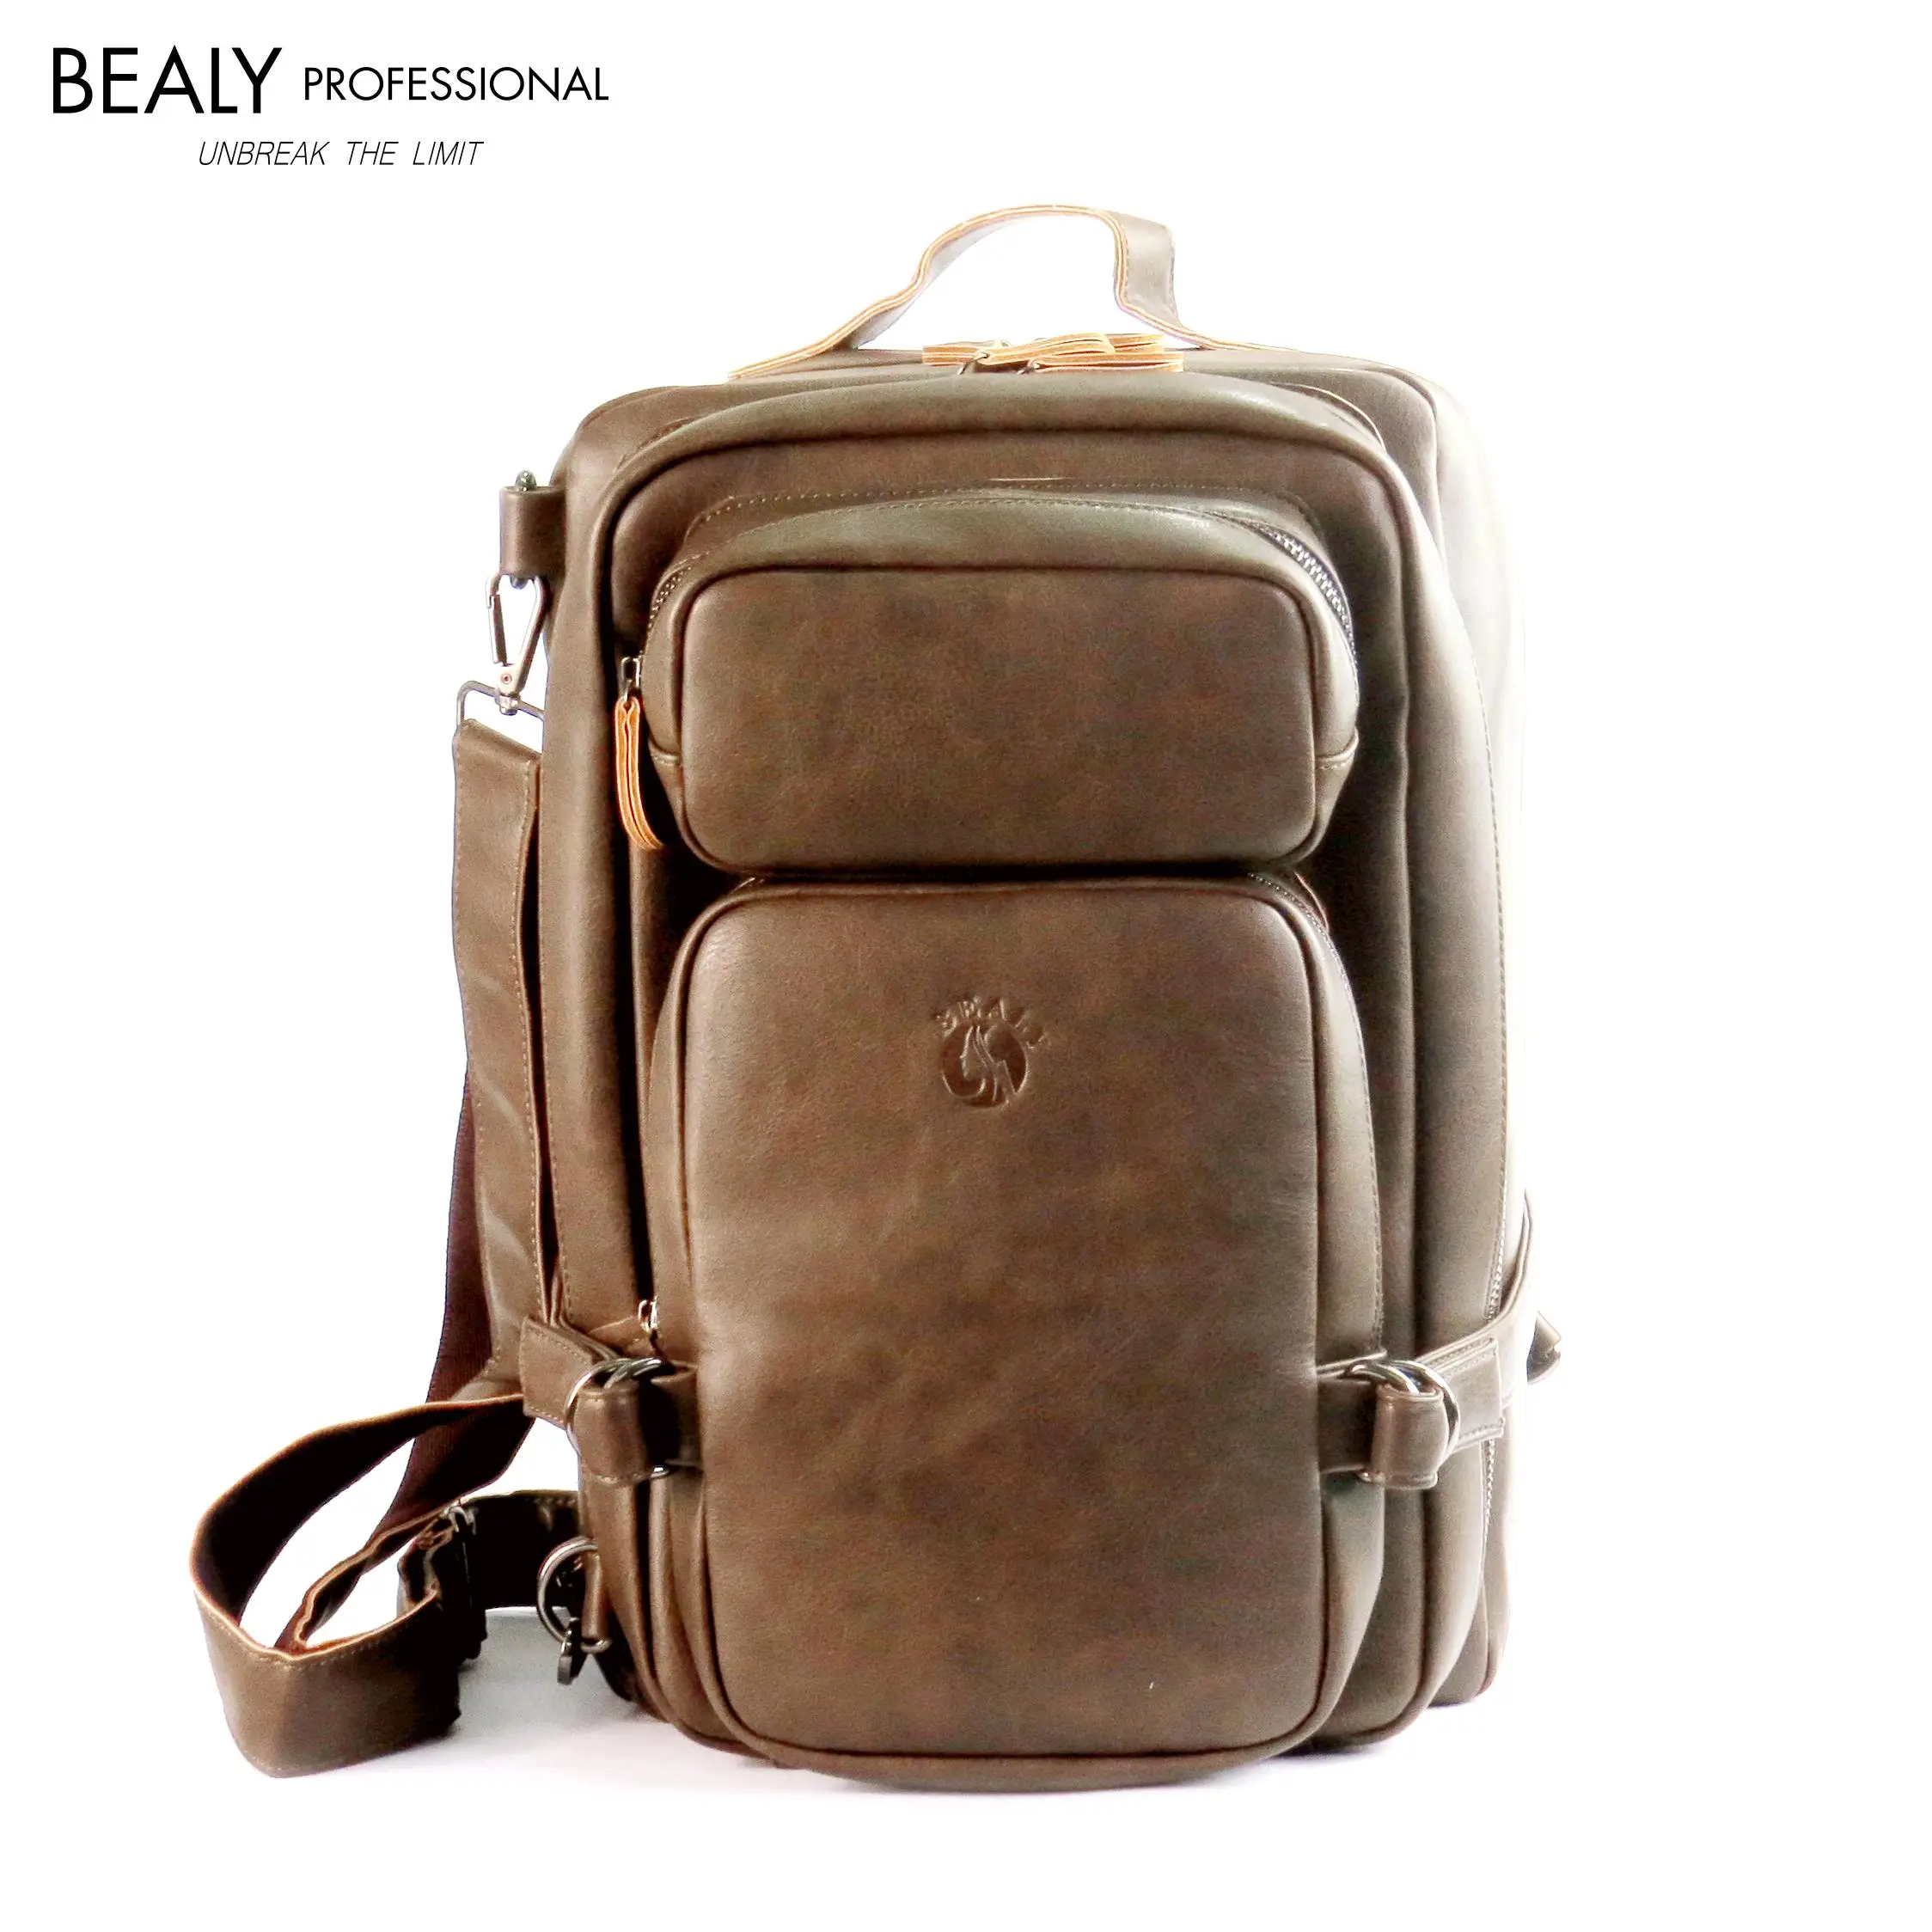 Makeup Brush Backpack Bealy